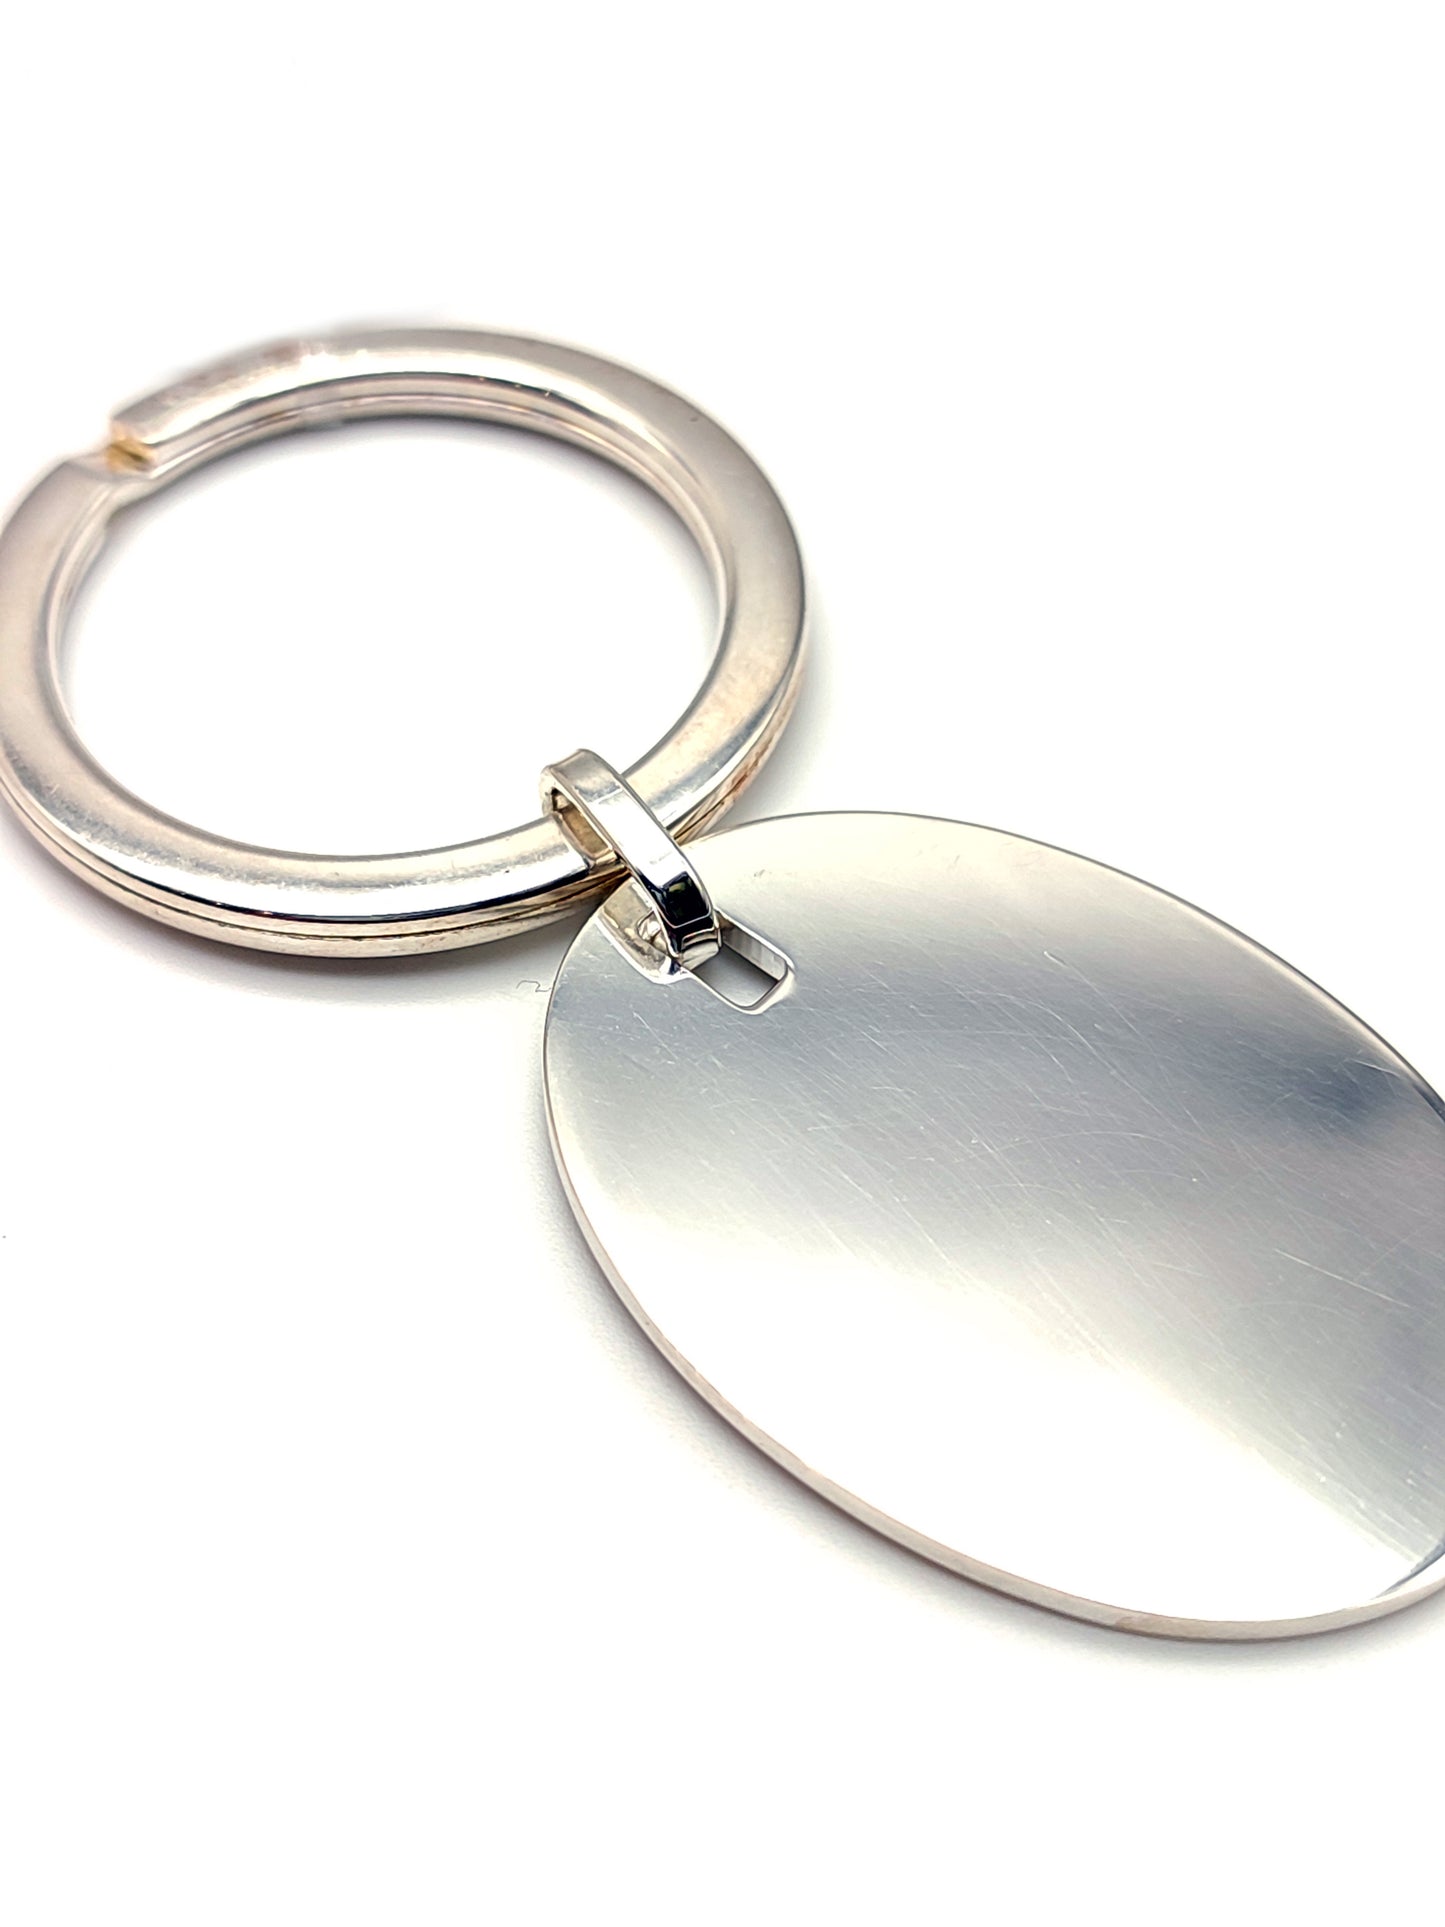 Silver key ring with smooth oval